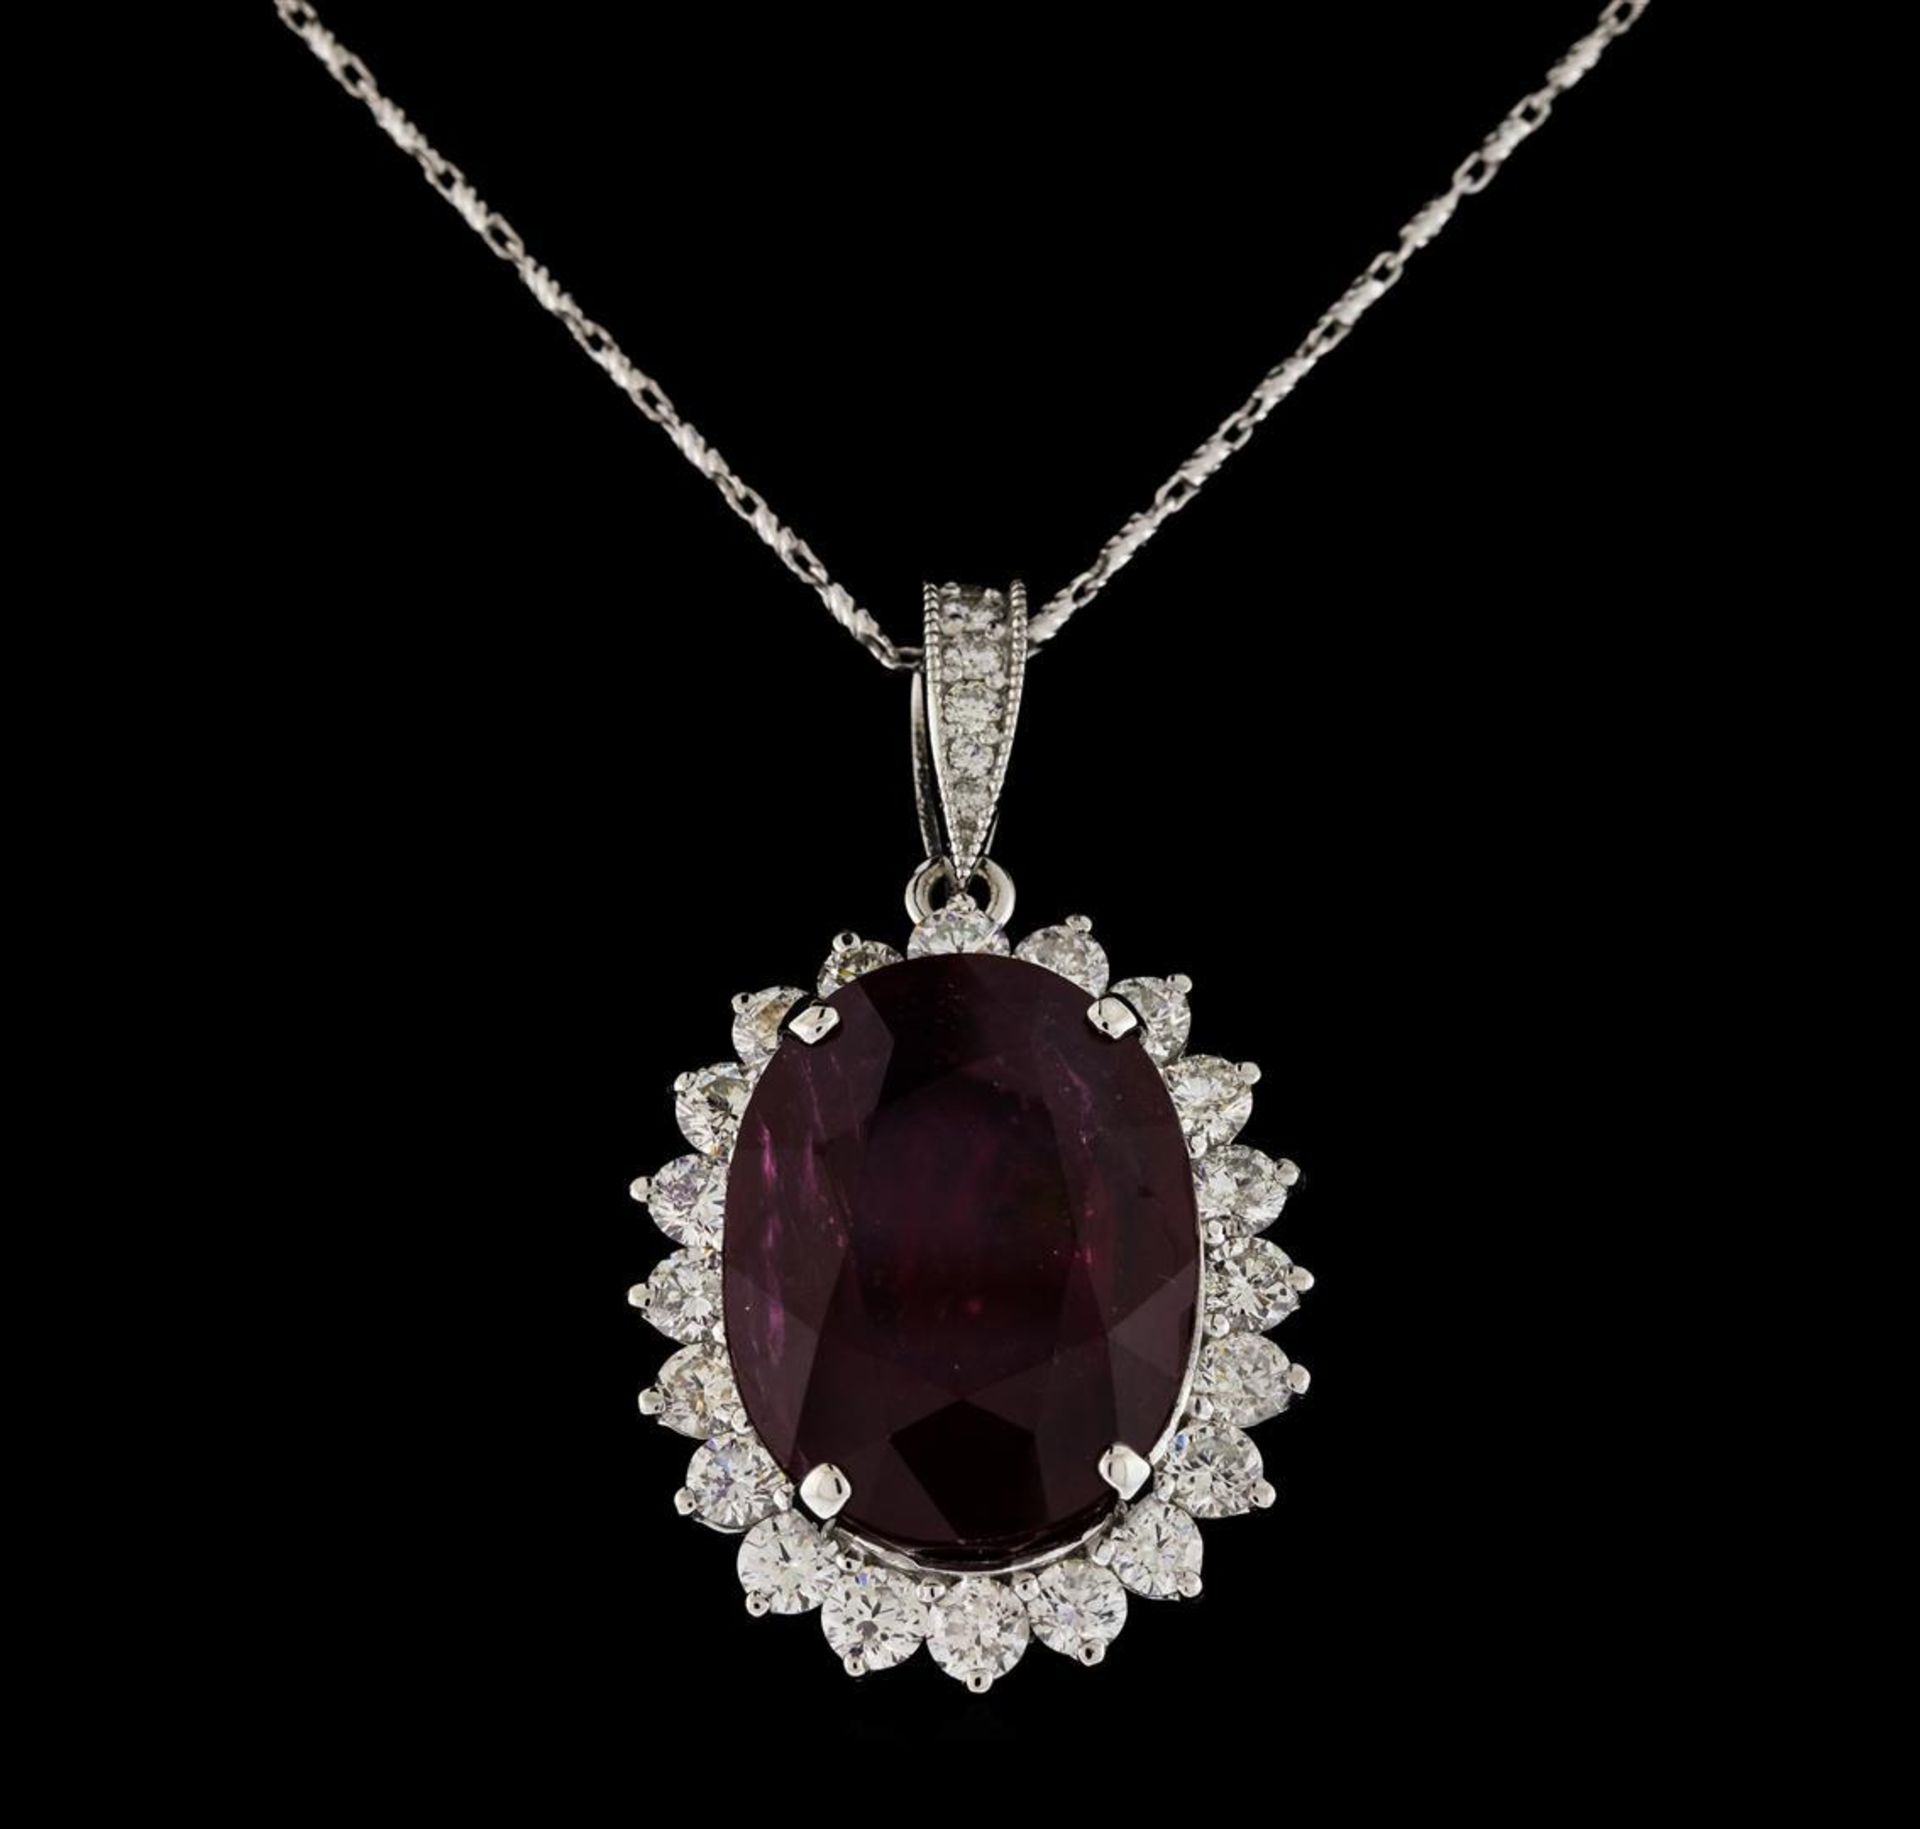 18.81 ctw Ruby and Diamond Pendant With Chain - 14KT White Gold - Image 2 of 3